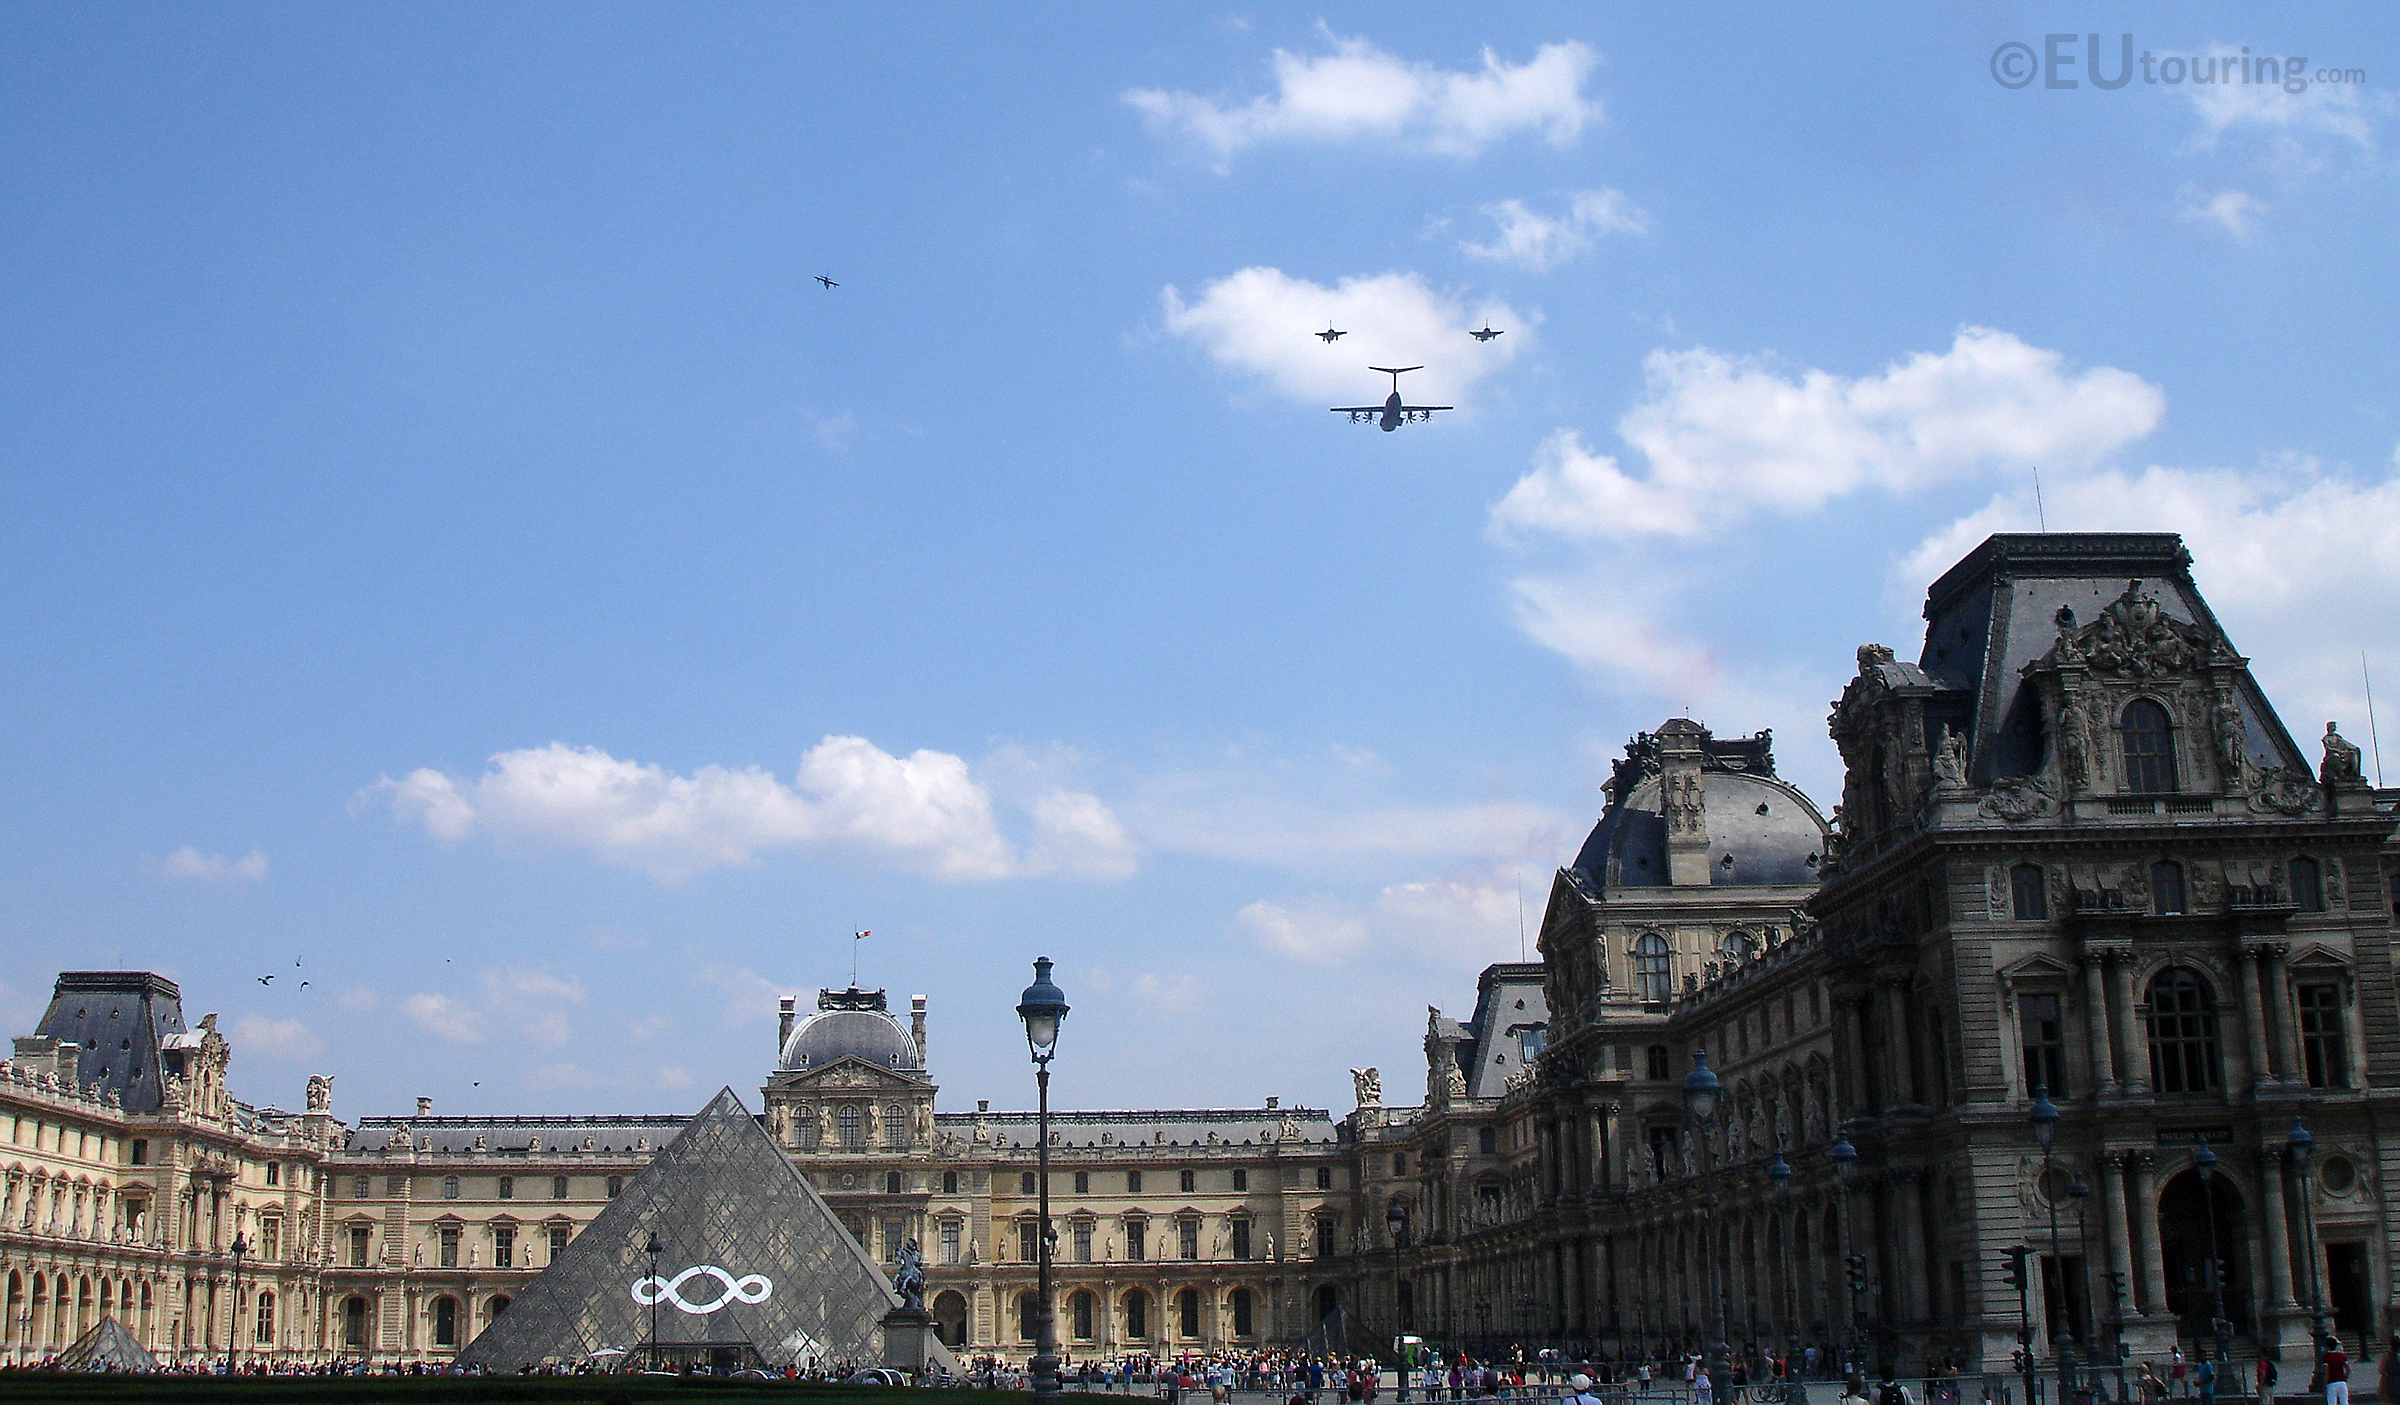 Planes above the Louvre Museum